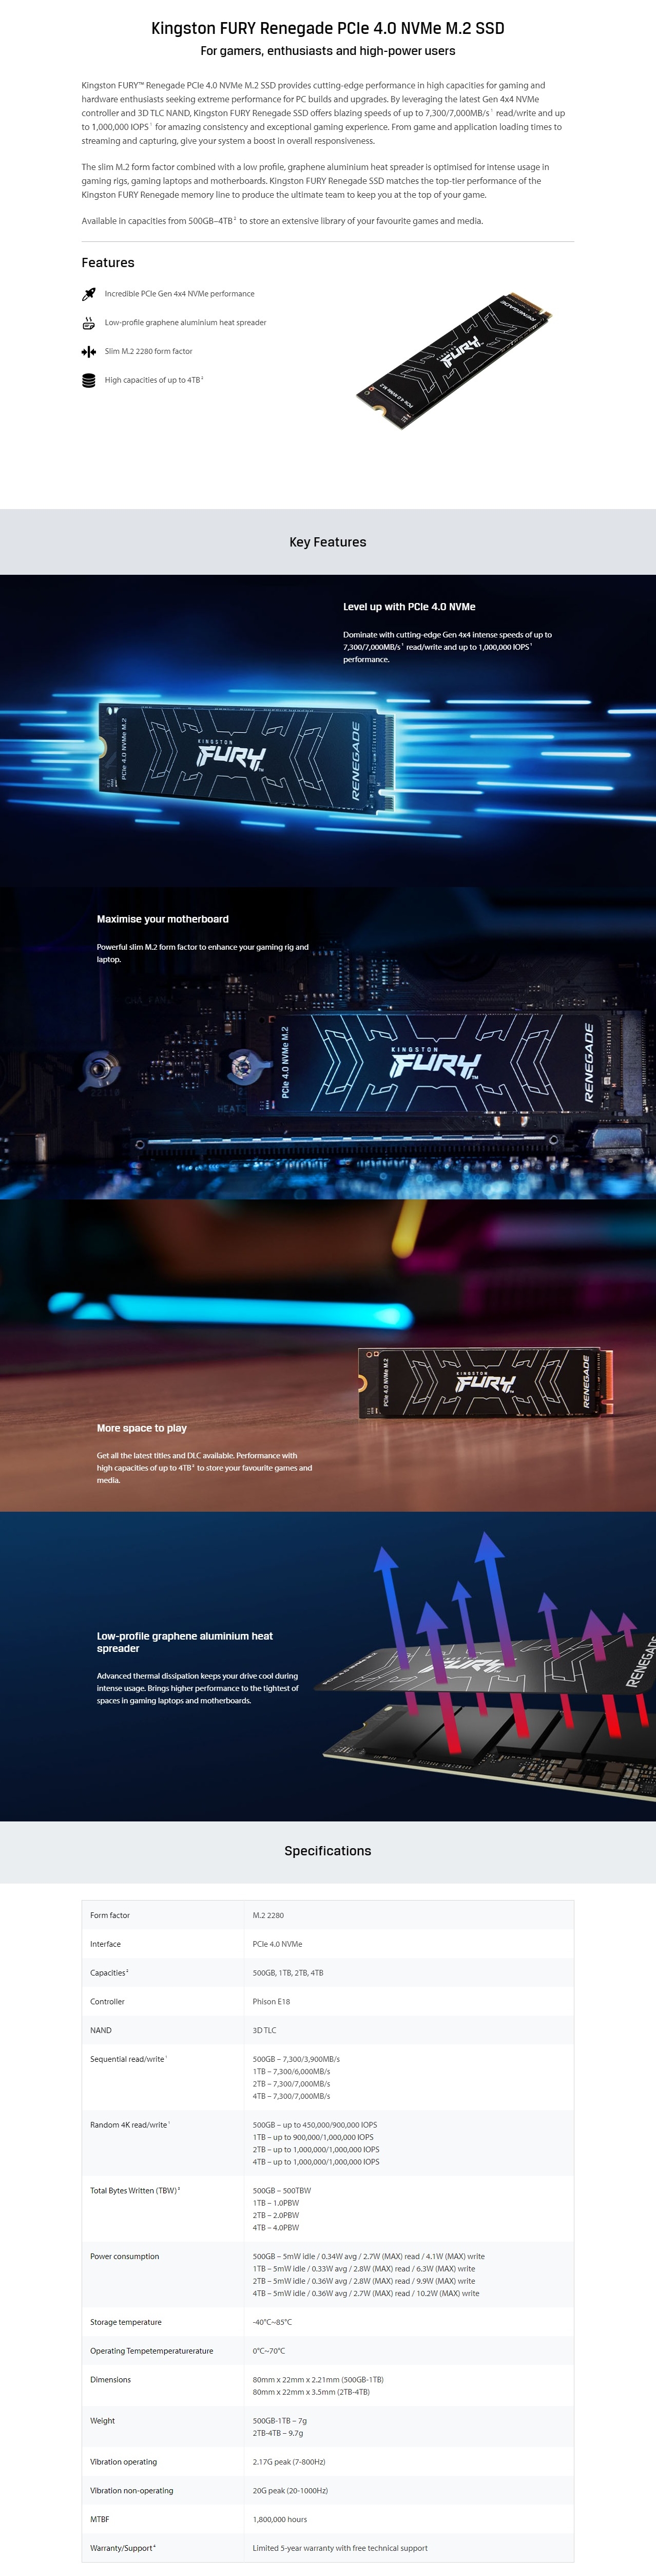 A large marketing image providing additional information about the product Kingston FURY Renegade PCIe Gen4 NVMe M.2 SSD - 2TB - Additional alt info not provided